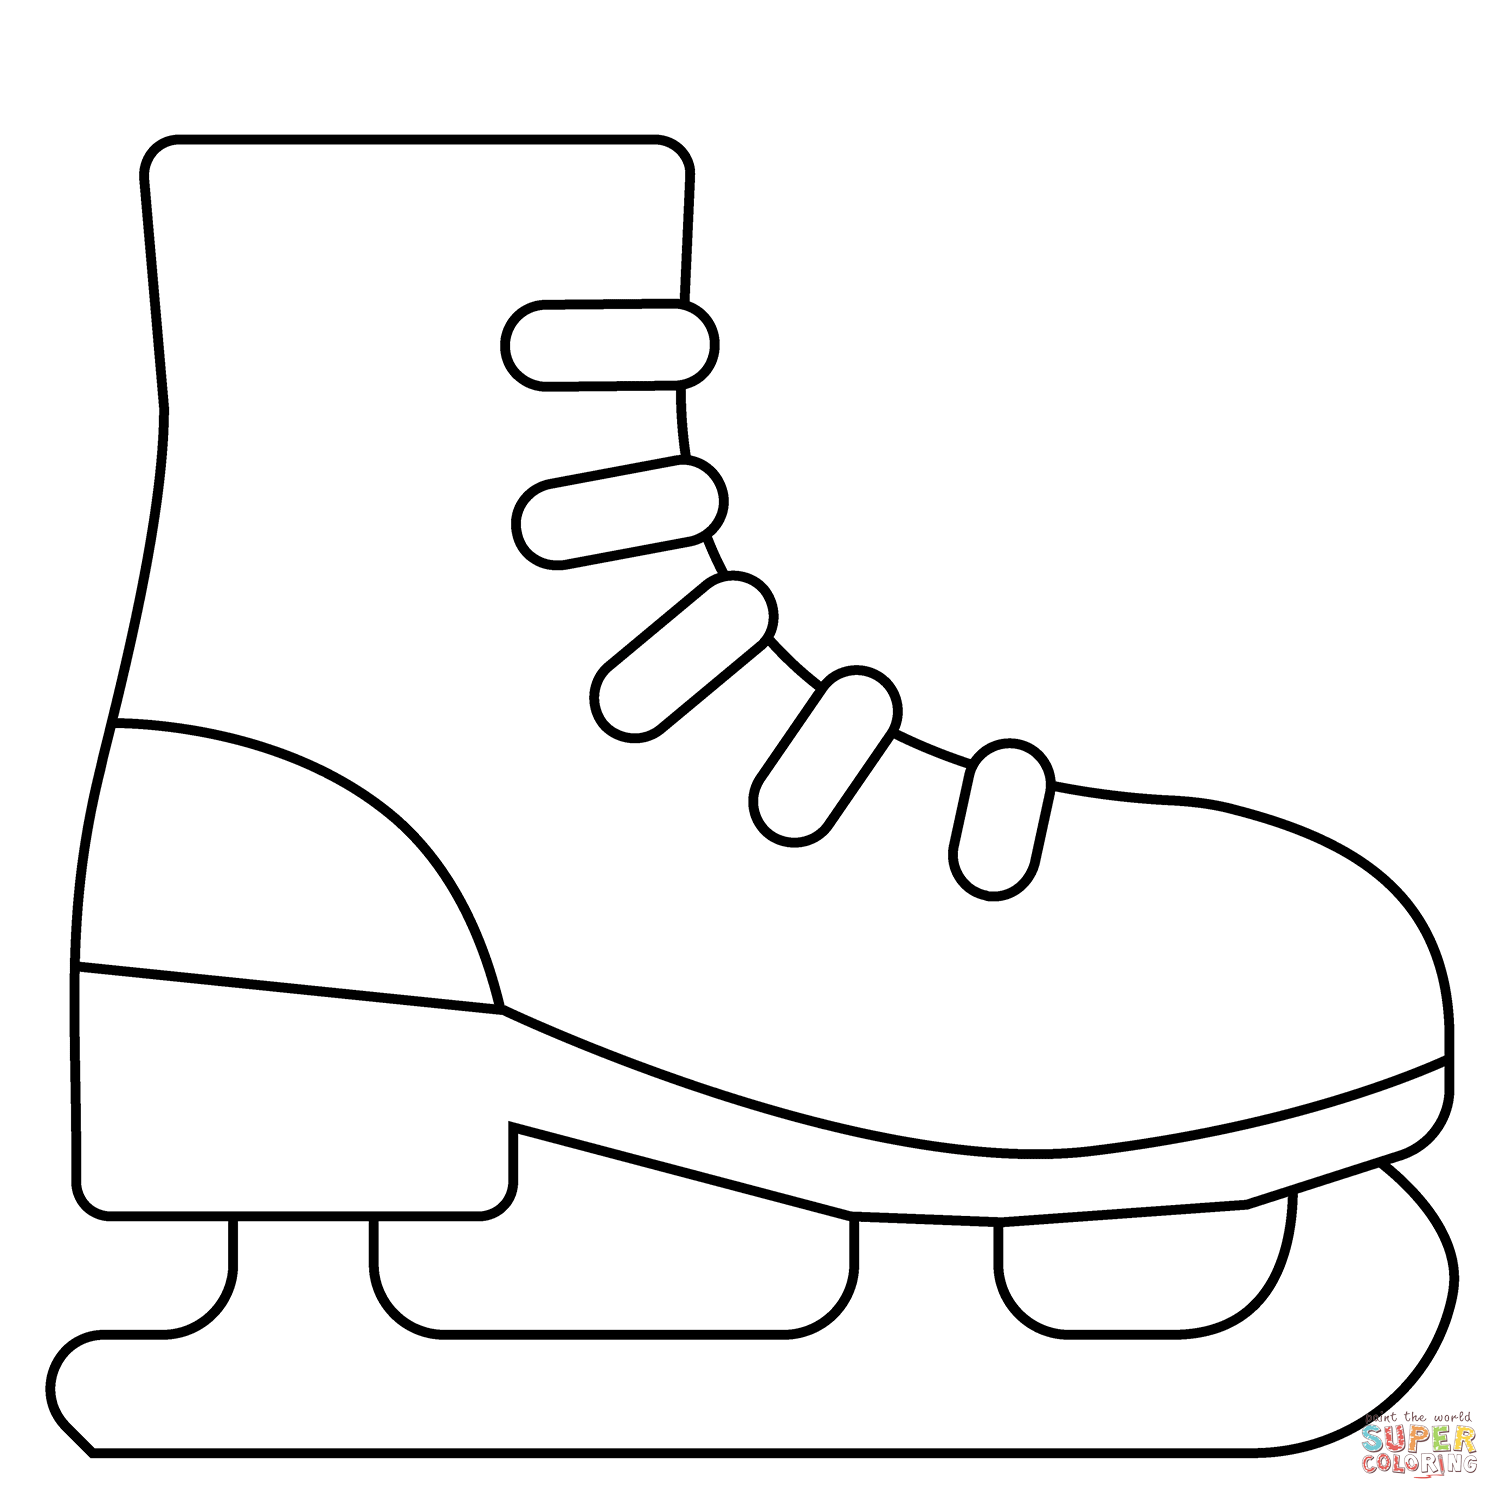 Ice skate emoji coloring page free printable coloring pages